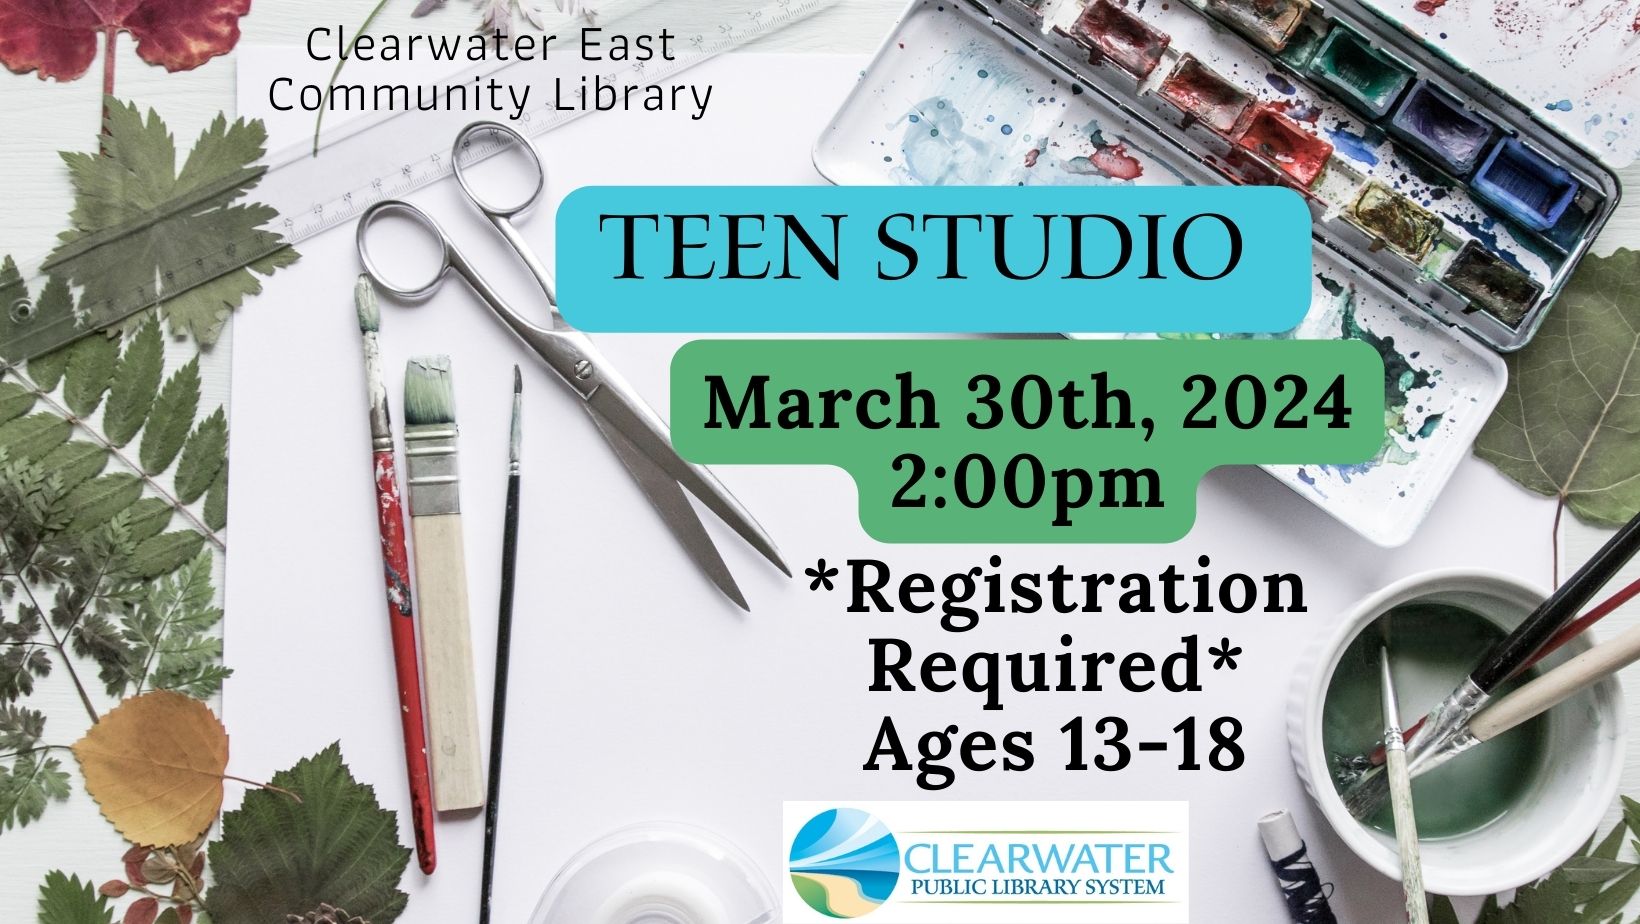 Teen Studio Art Supplies Leaves and Paint, March 30th 2024 